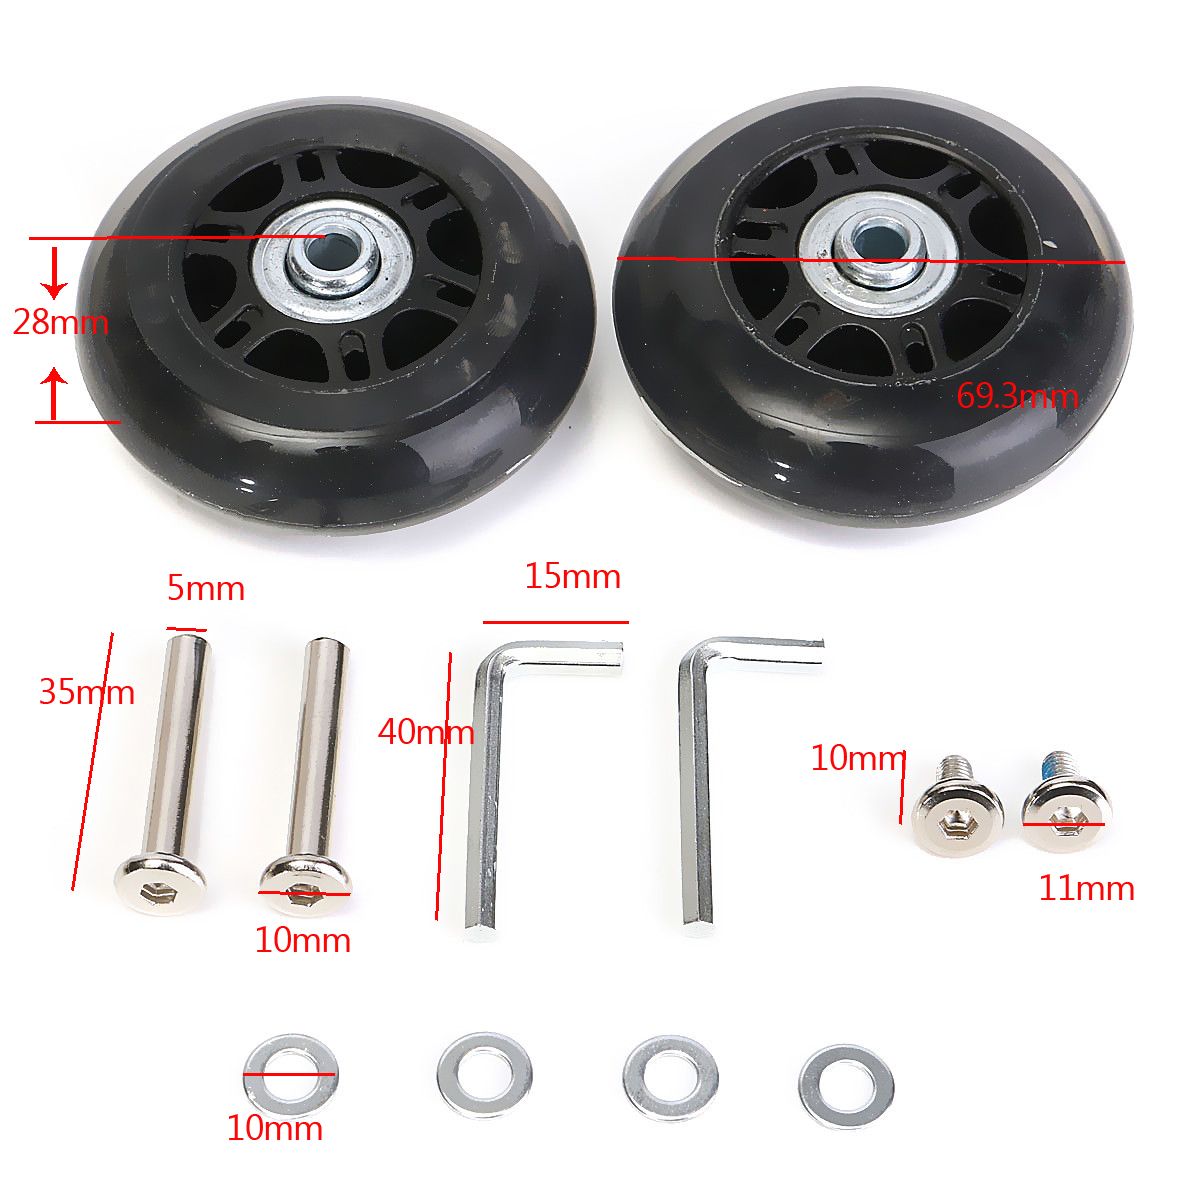 2pcs-Luggage-Suitcase-Replacement-Wheels-Axles-Deluxe-Repair-OD-70mm-1045175